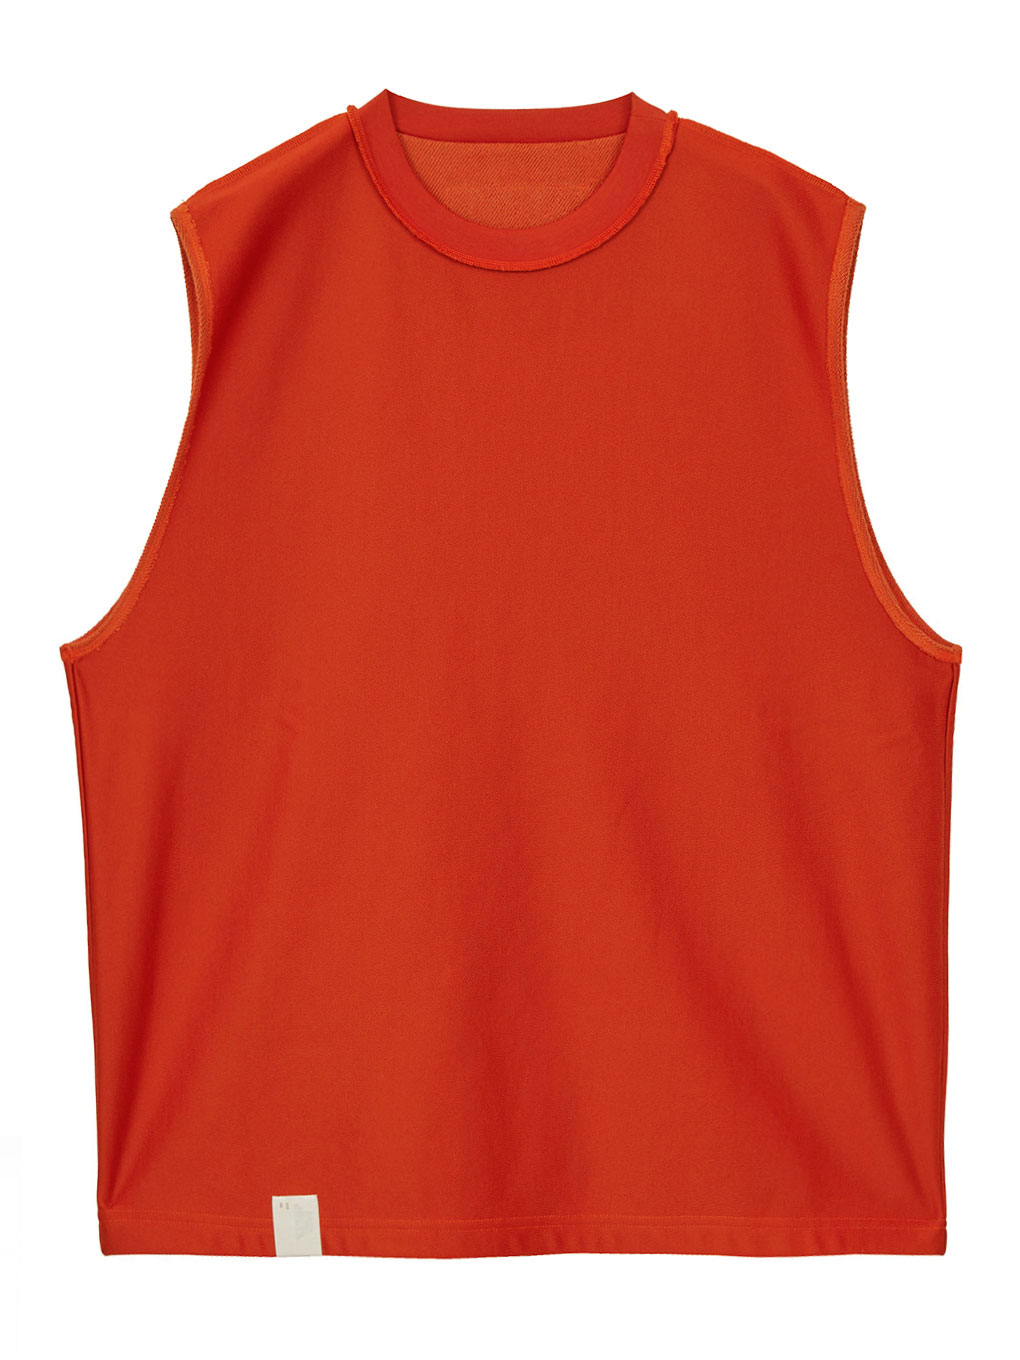 Ameri VINTAGE(アメリ ヴィンテージ)直営通販サイト / N.HOOLYWOOD for AMERI SIZE NAME TANK TOP